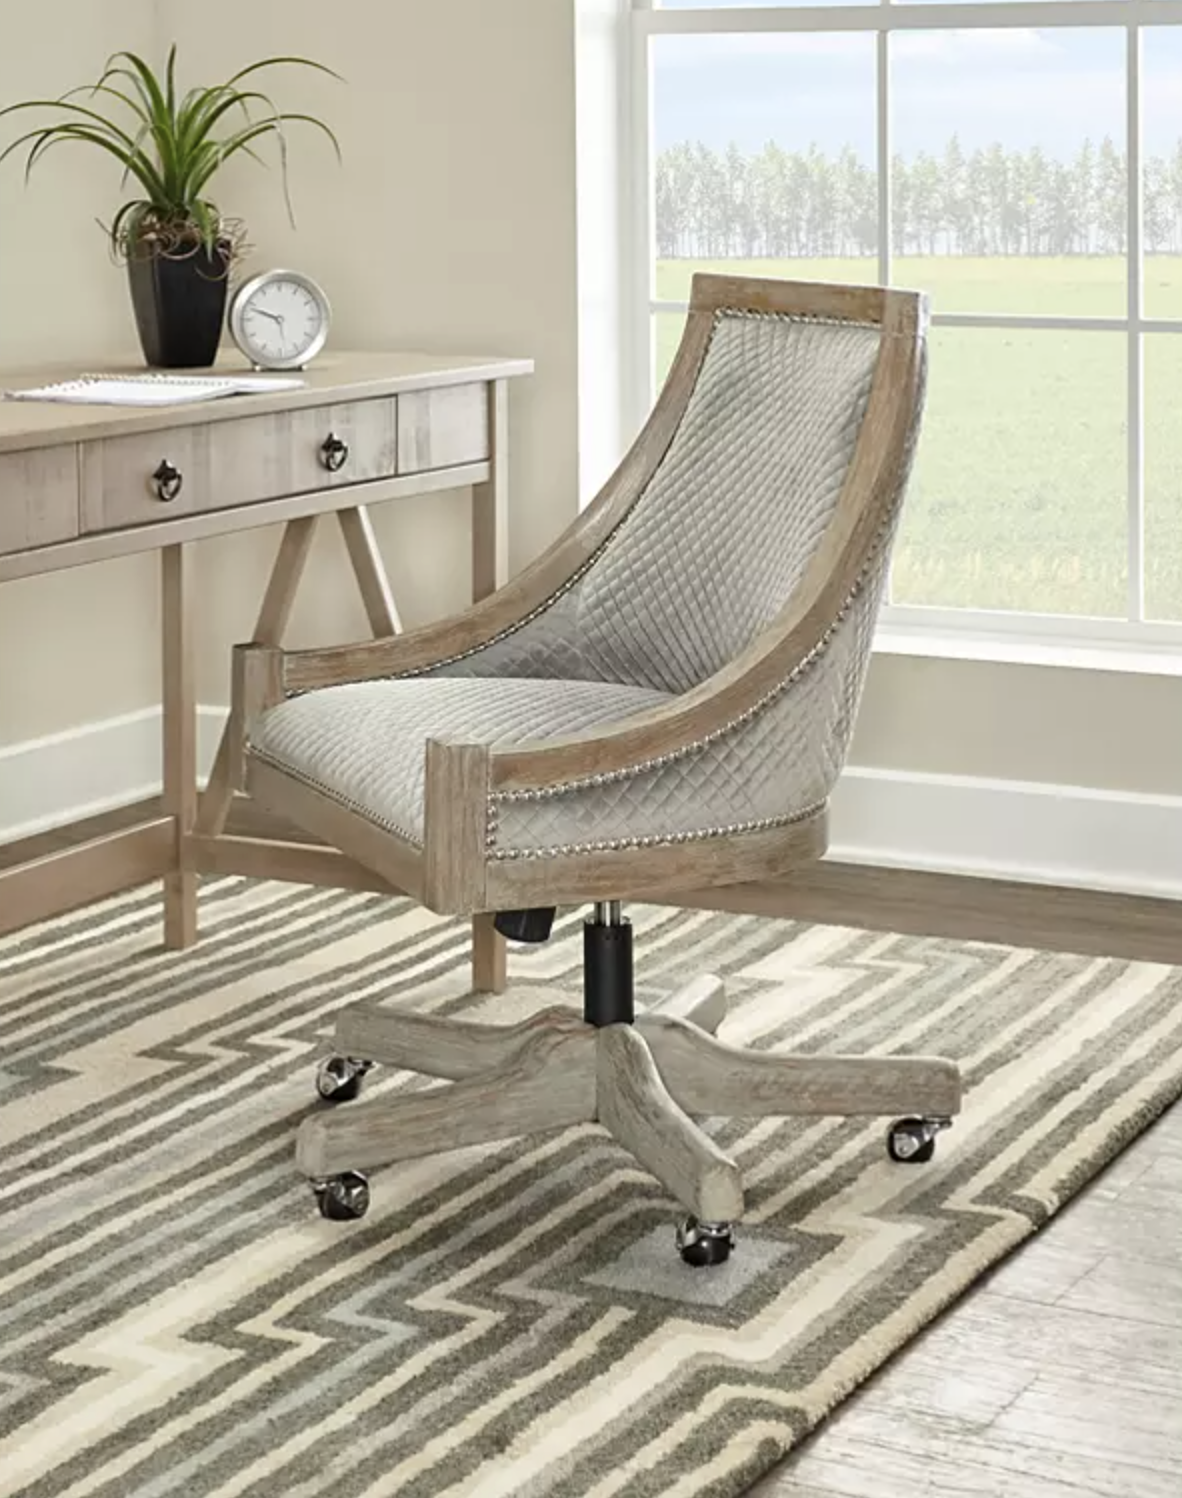 The quilted office chair in brown with gray cushion